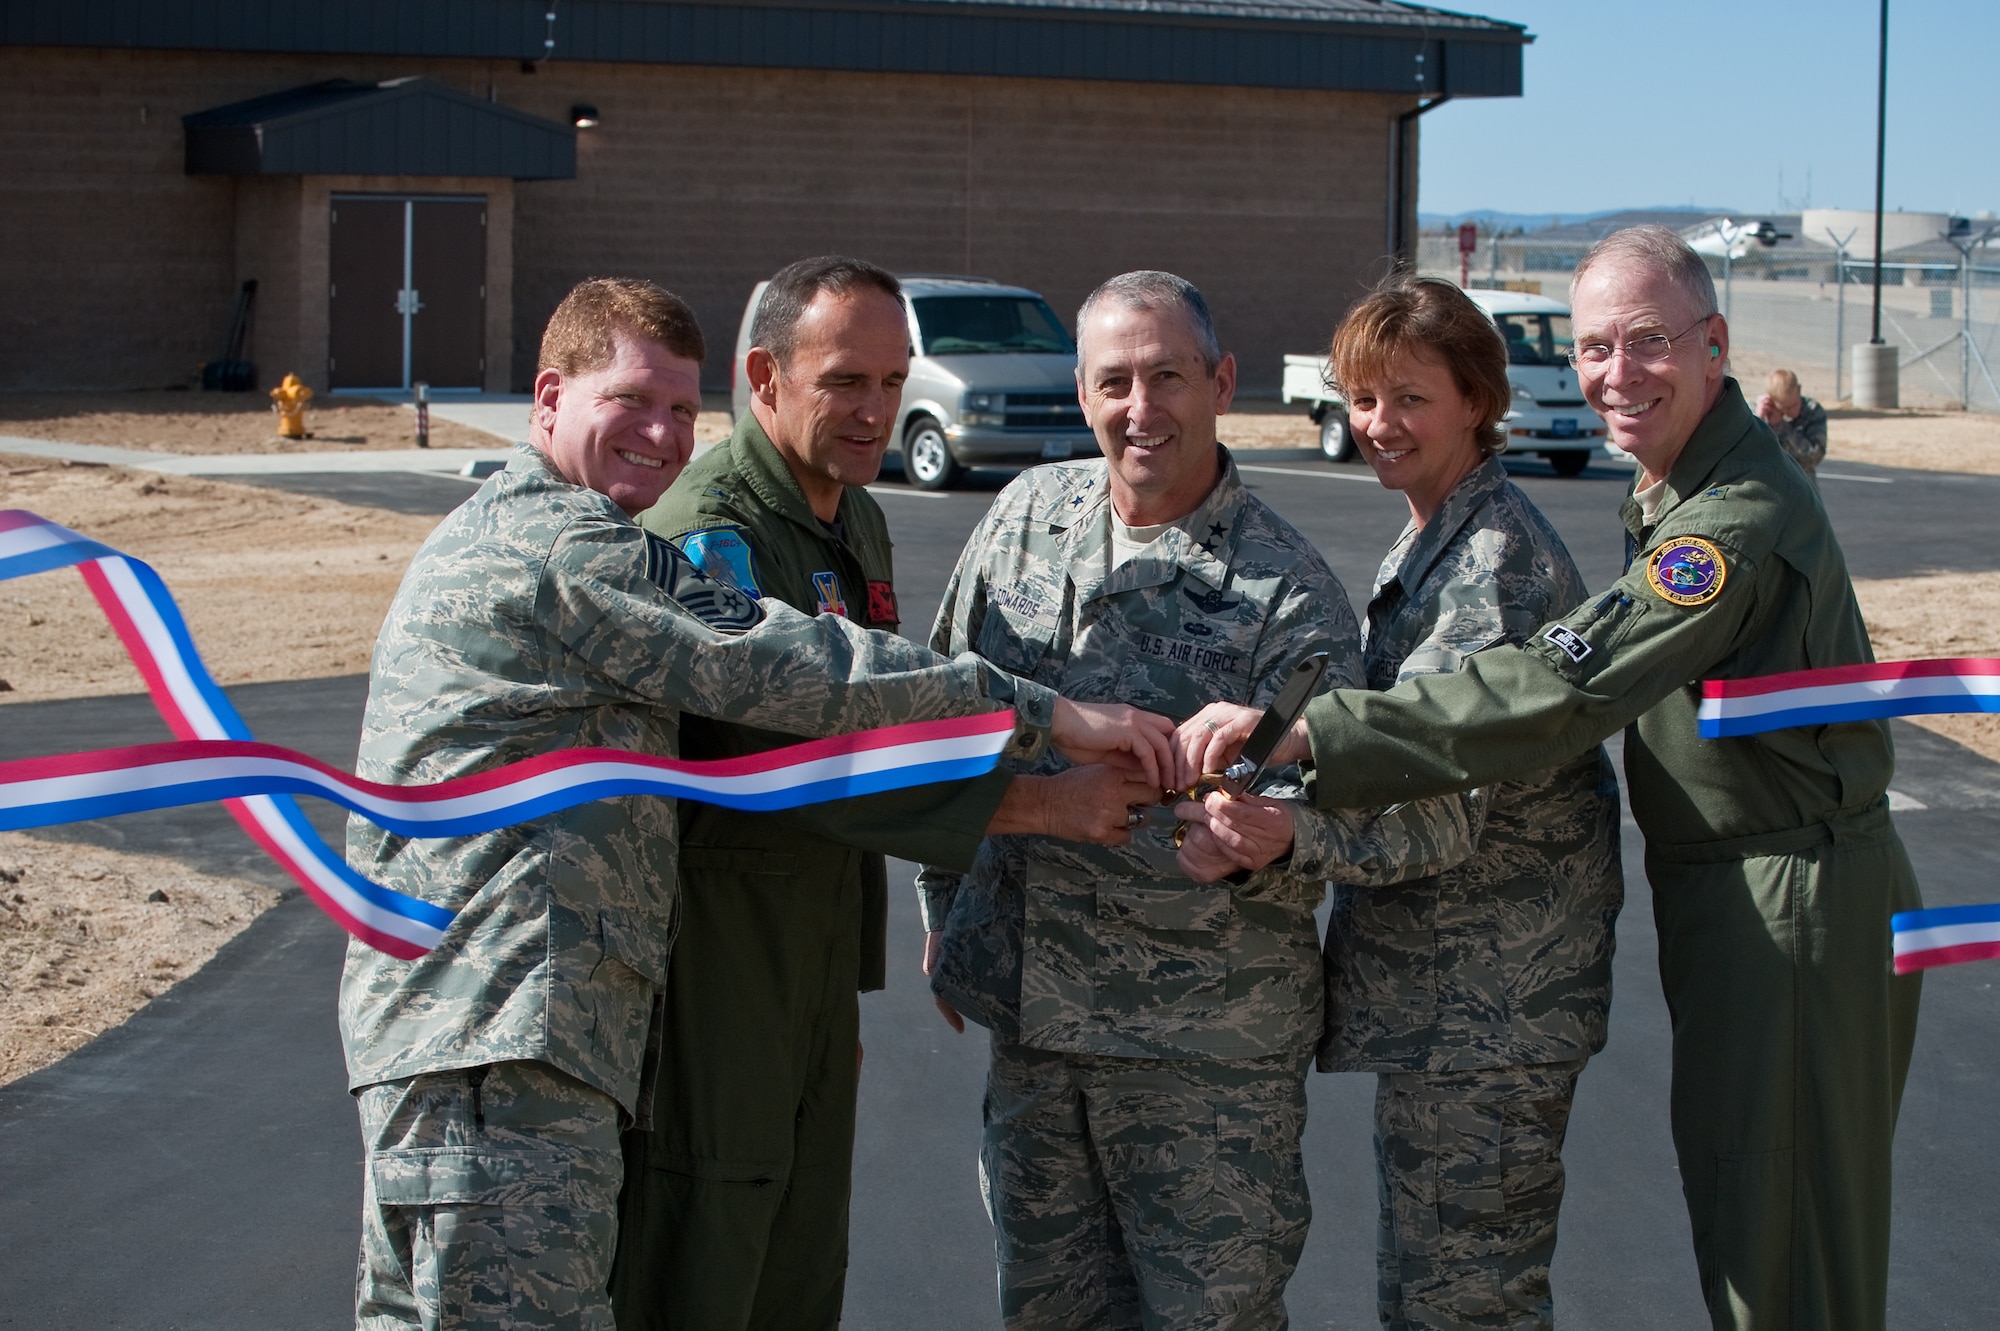 (From left to right) Chief Master Sgt. John Criswell, 140th Wing Command Chief, Brig. Gen. Trulan Eyre, 140th Wing Commander, Maj. Gen. H. Michael Edwards, Colorado Adjutant General, Chief Master Sgt. Annadele Kenderes, State Command Chief Master Sgt. and Brig. Gen. William Hudson, Colorado Air National Guard Commander cut the ribbon and officially open the new 140th Alert Crew building 911 April 2. (U.S. Air Force photo/Master Sgt. John Nimmo, Sr.) (RELEASED)